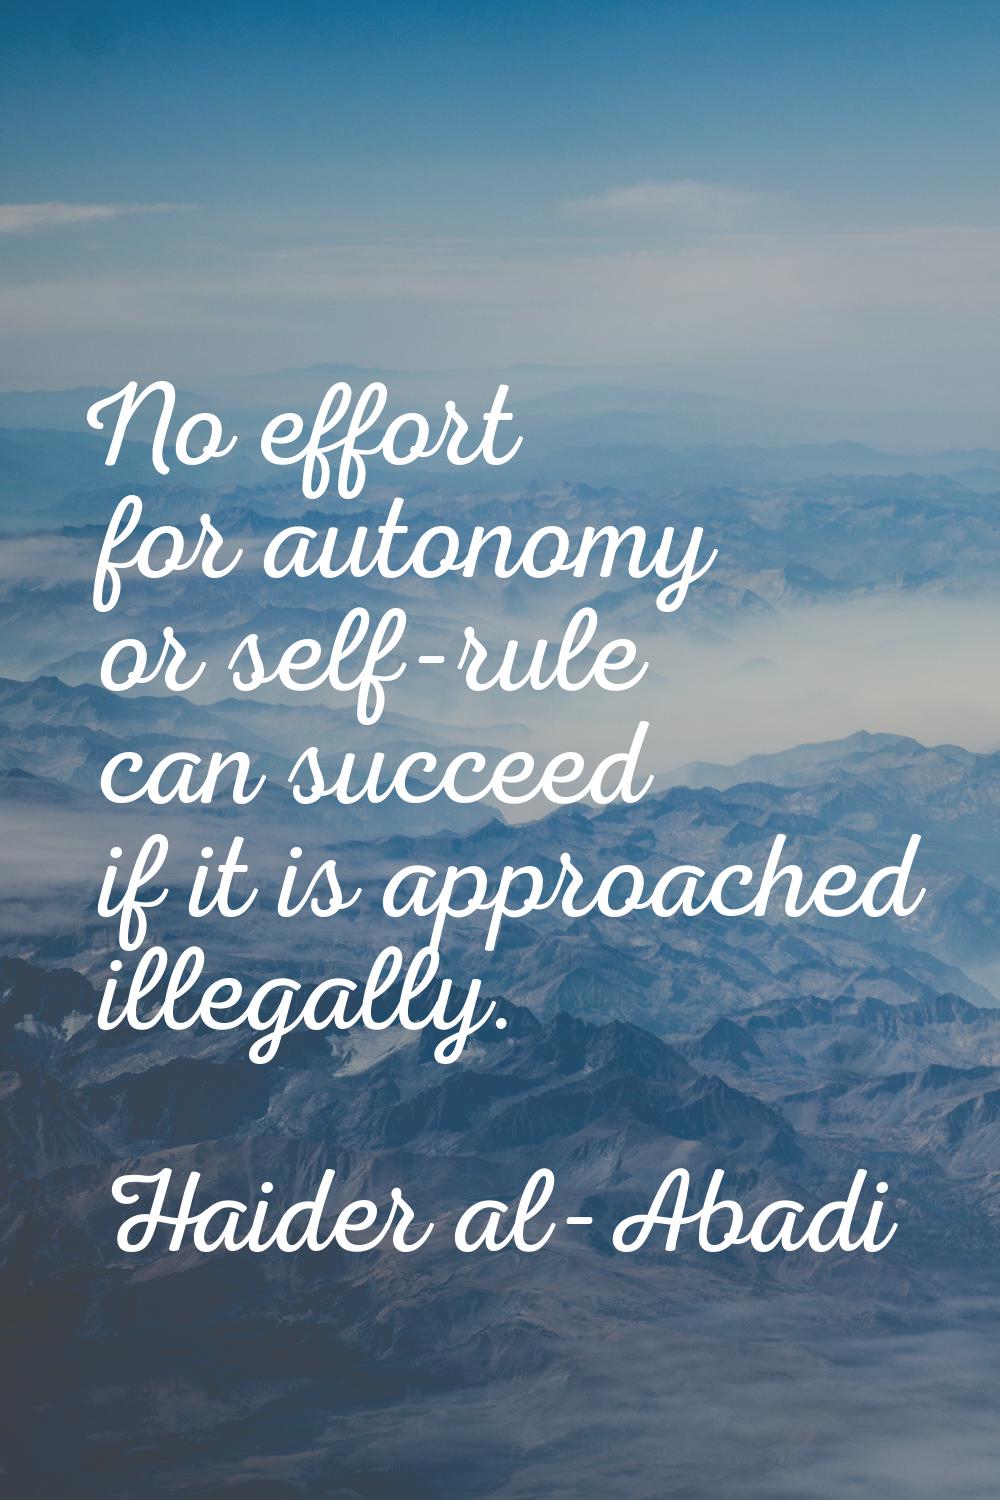 No effort for autonomy or self-rule can succeed if it is approached illegally.